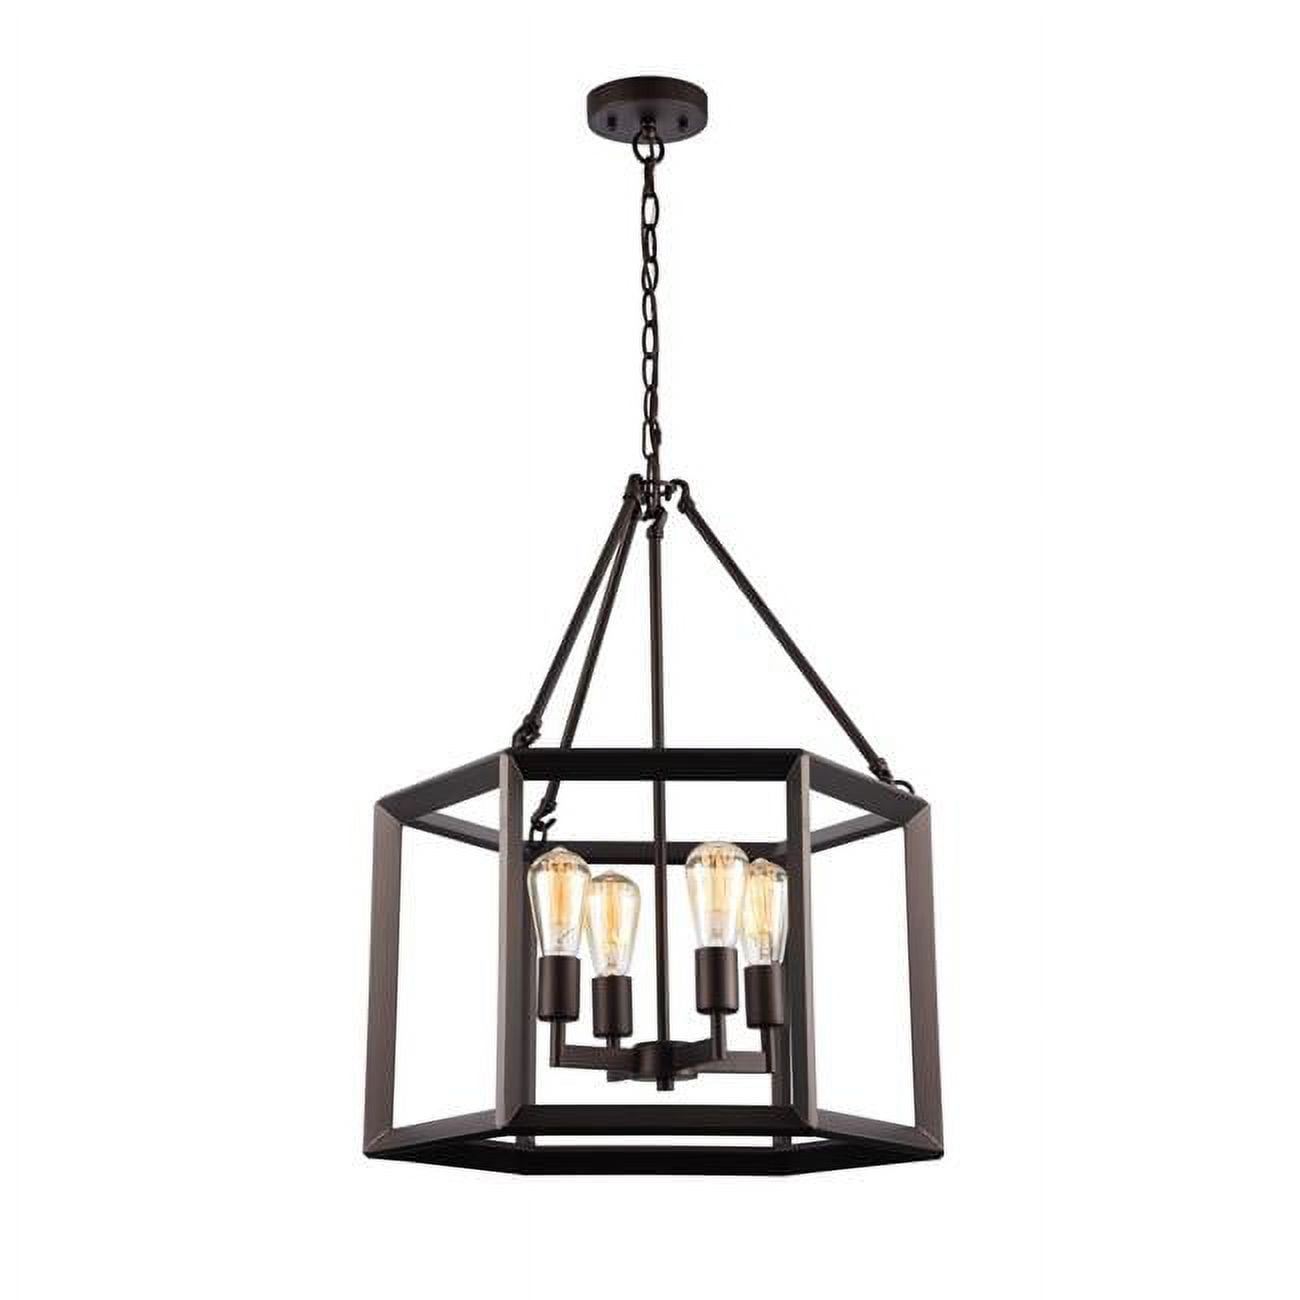 Ch59058rb21-up4 21 In. Lighting Ironclad Industrial-style 4 Light Rubbed Bronze Ceiling Pendant - Oil Rubbed Bronze